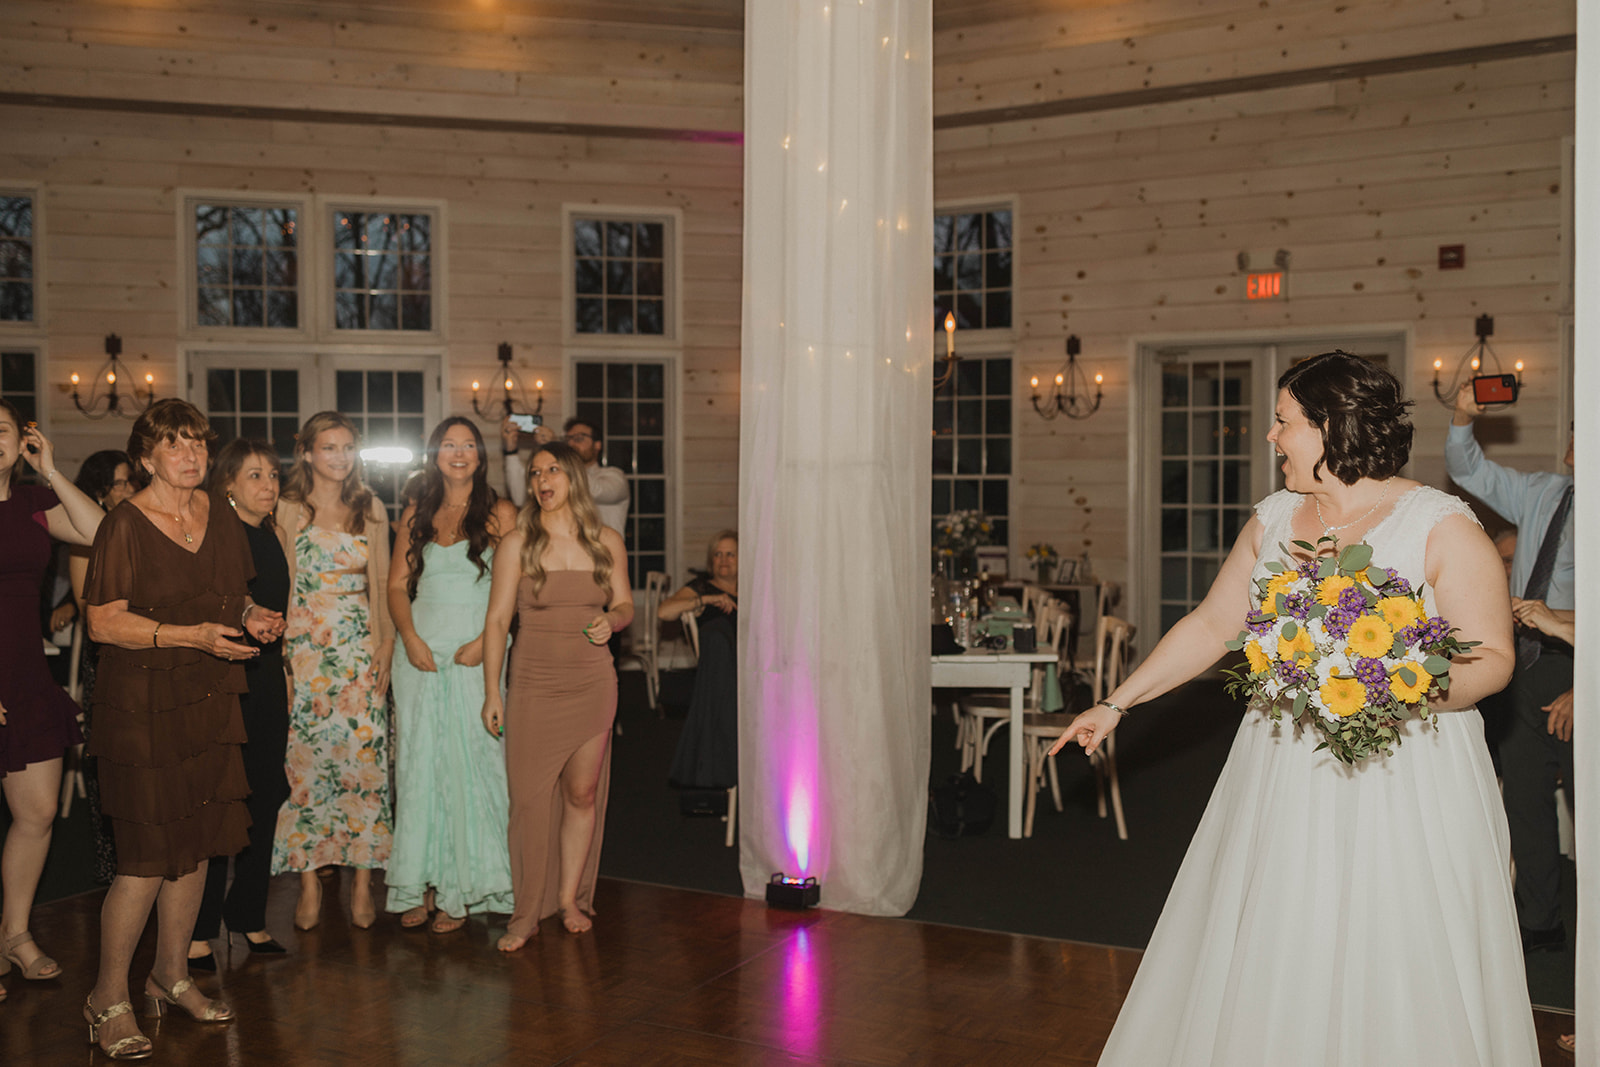 Bride gets ready to toss the bouquet!